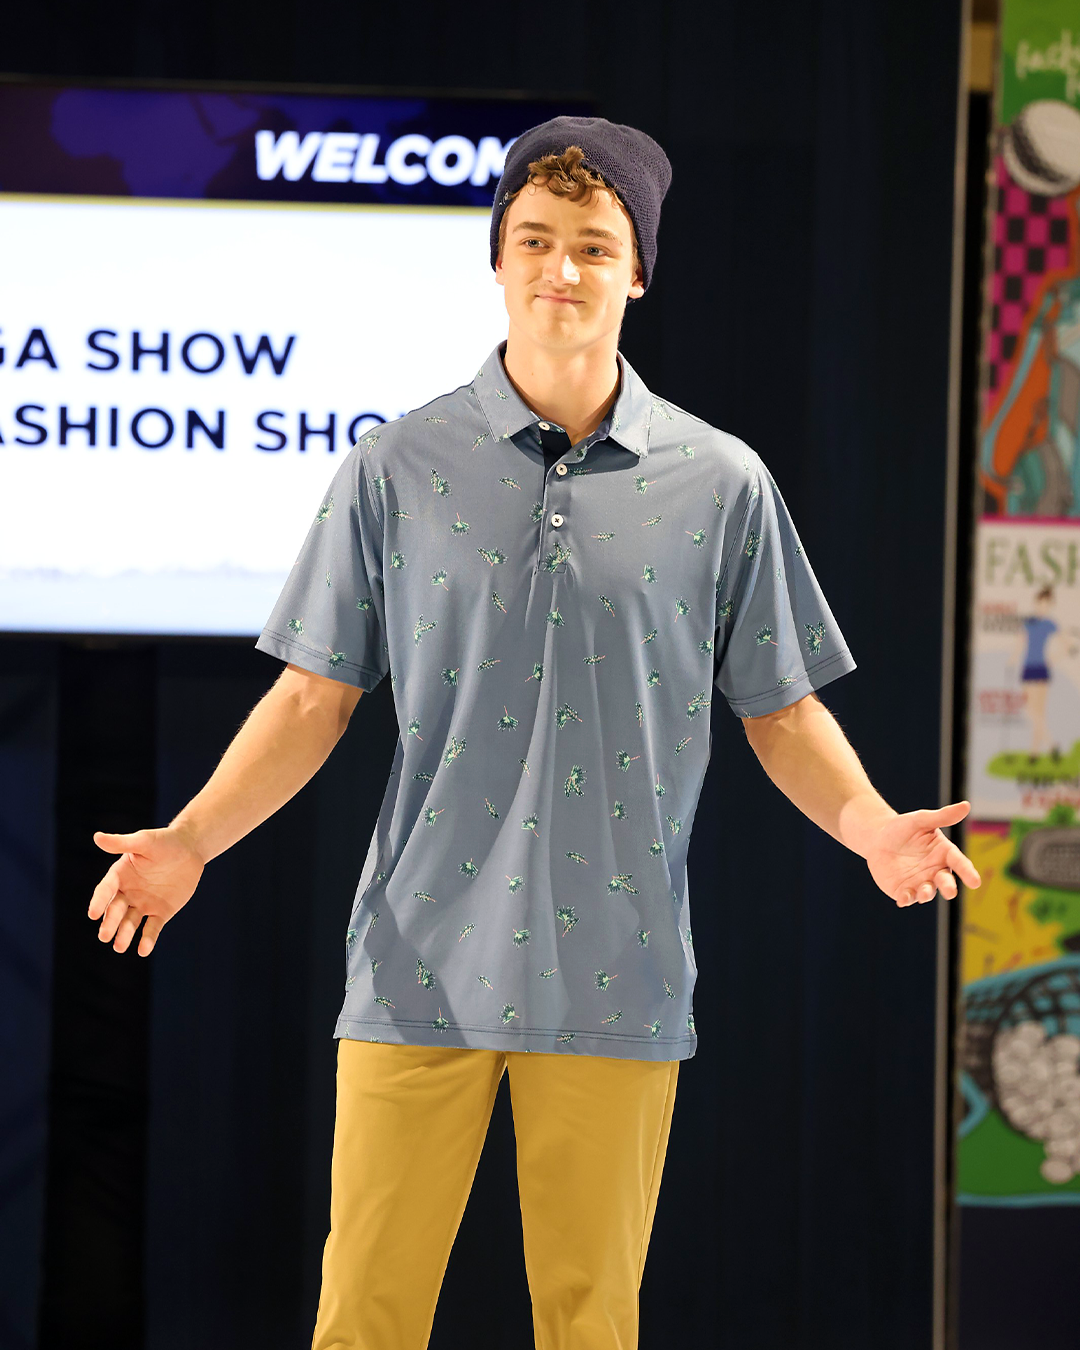 Golf Fashion Experts on the Trends and Apparel That Will Dominate 2023